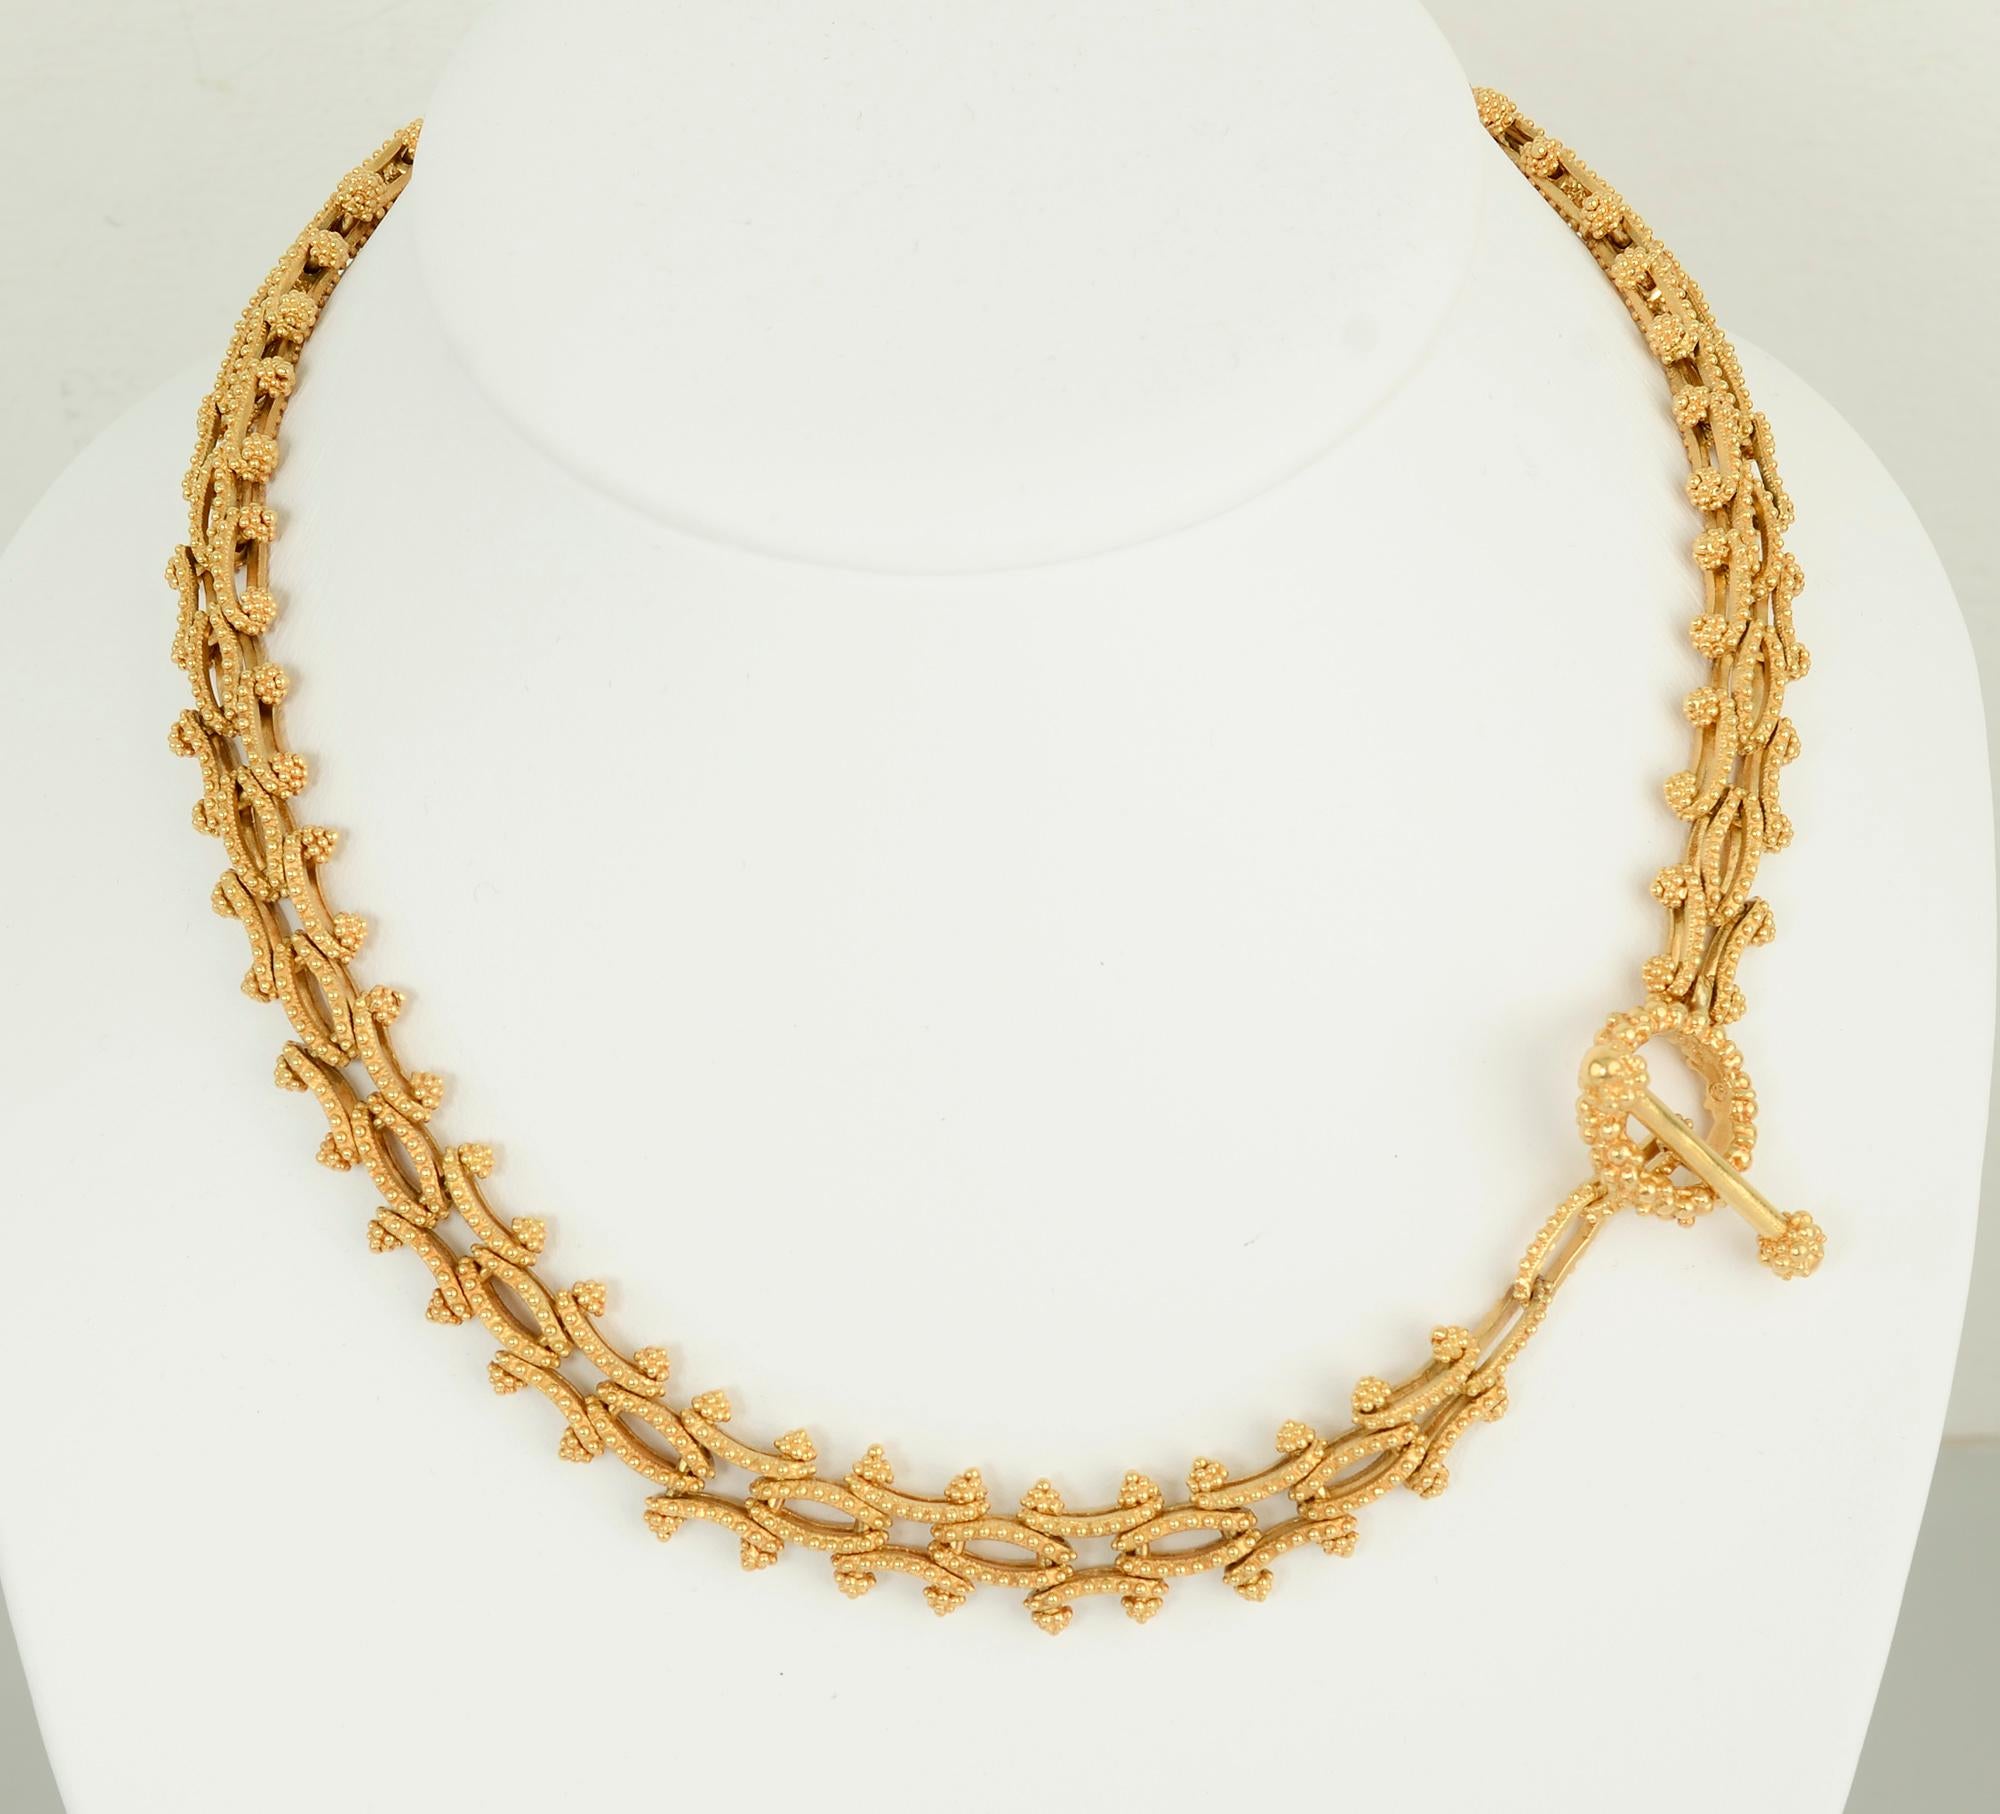 This unusual gold link necklace and bracelet combination is elegant and versatile. It can be worn as an 18 inch necklace and 7 3/4 inch bracelet or combined to create a long necklace.
The links are both concave and convex. They are all covered with